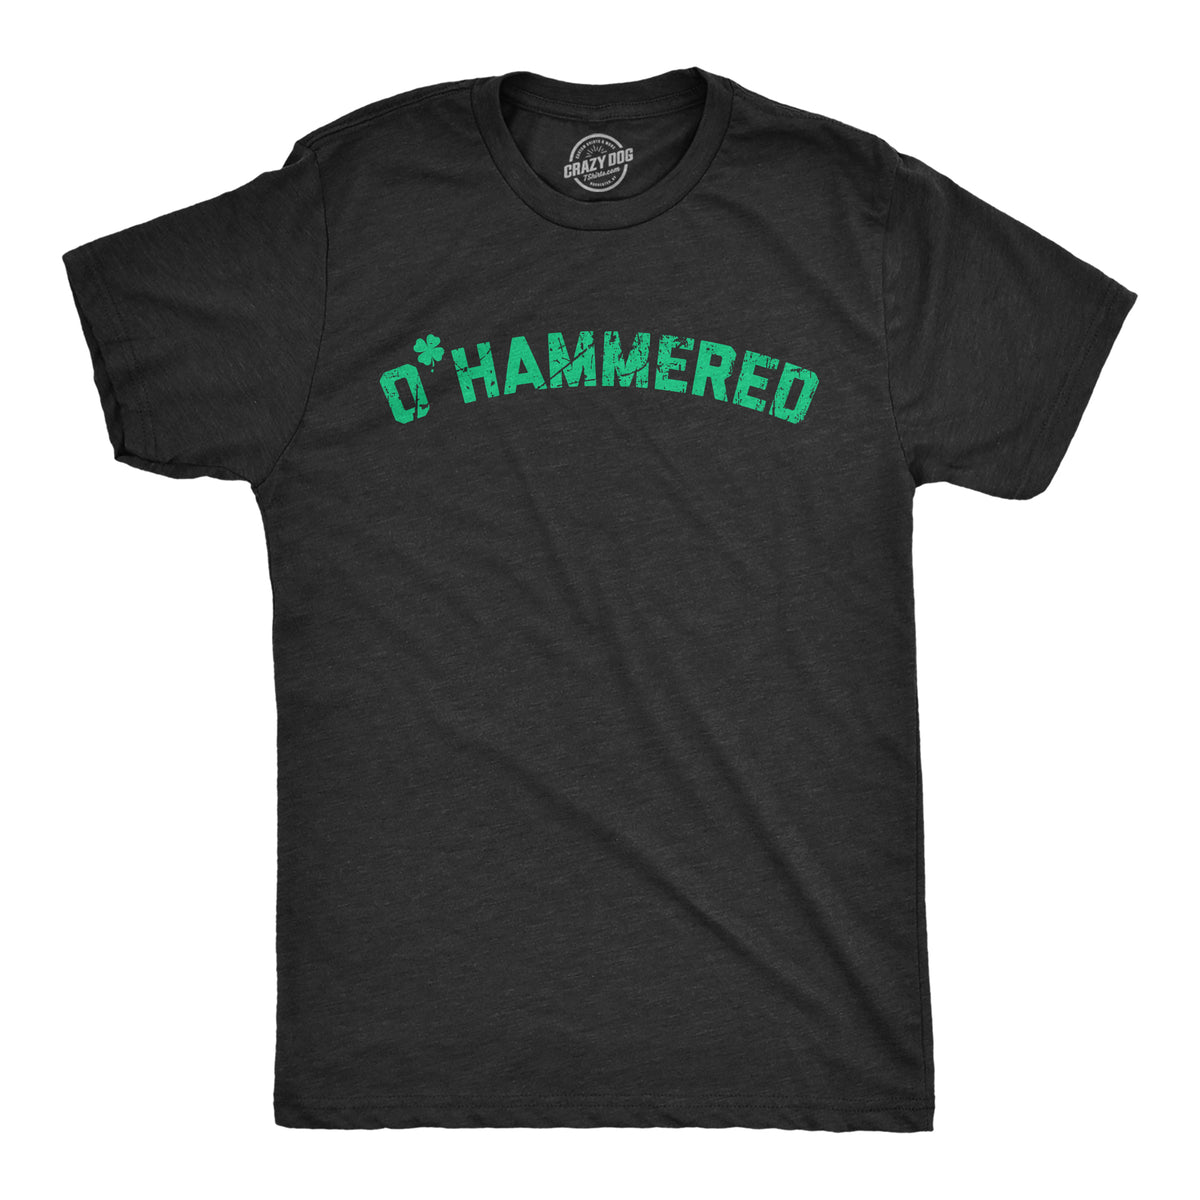 Funny Heather Black - HAMMERED OHammered Mens T Shirt Nerdy Saint Patrick&#39;s Day Drinking Tee